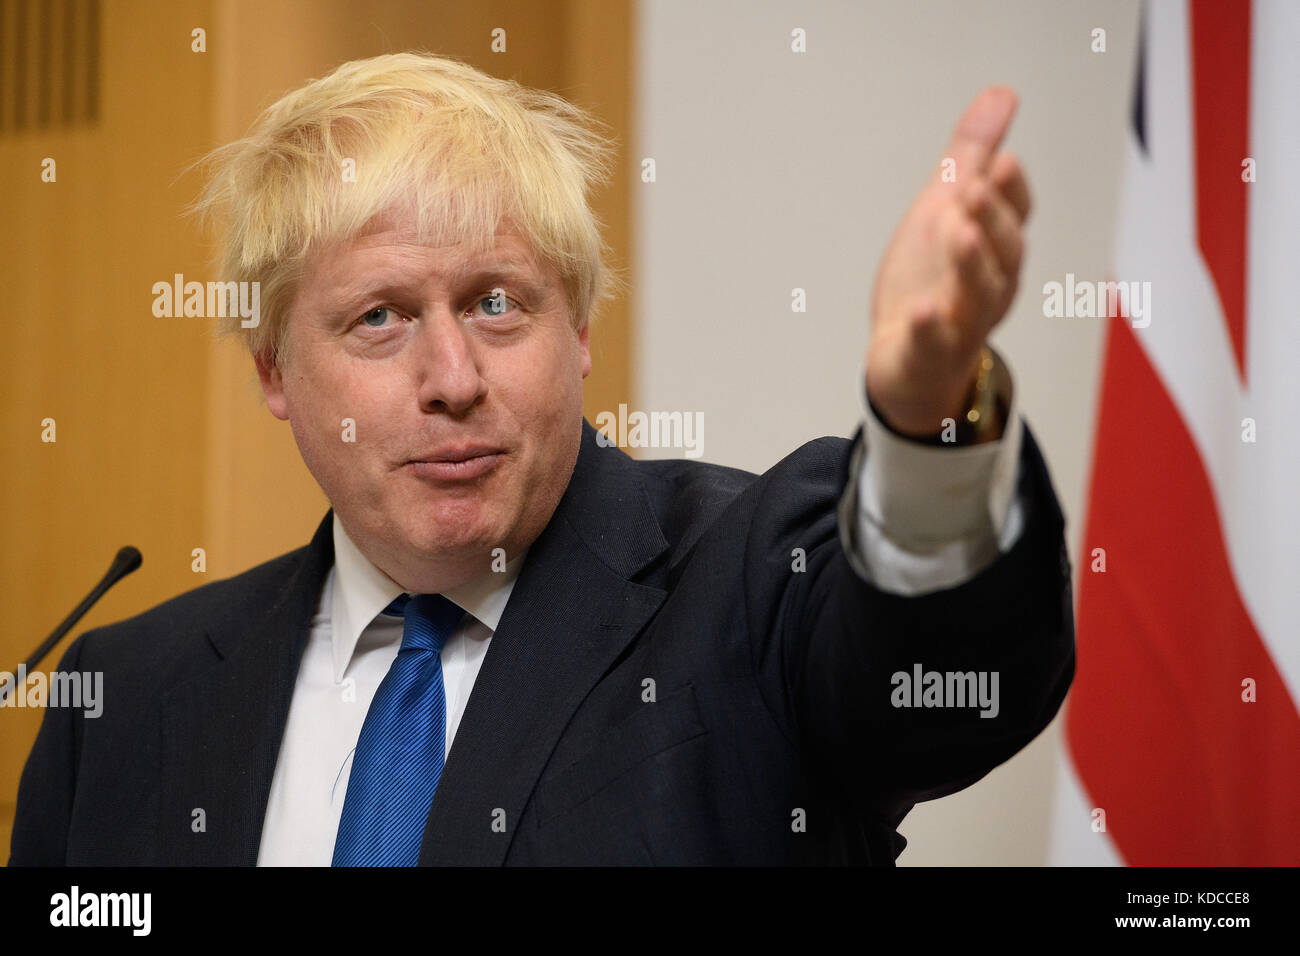 Foreign Secretary Boris Johnson, during a press conference with Poland's Foreign Minister Witold Waszczykowksi, Defence Secretary Sir Michael Fallon and Polish Defence Minister Antoni Macierewicz, at the Foreign & Commonwealth Office in London. Stock Photo